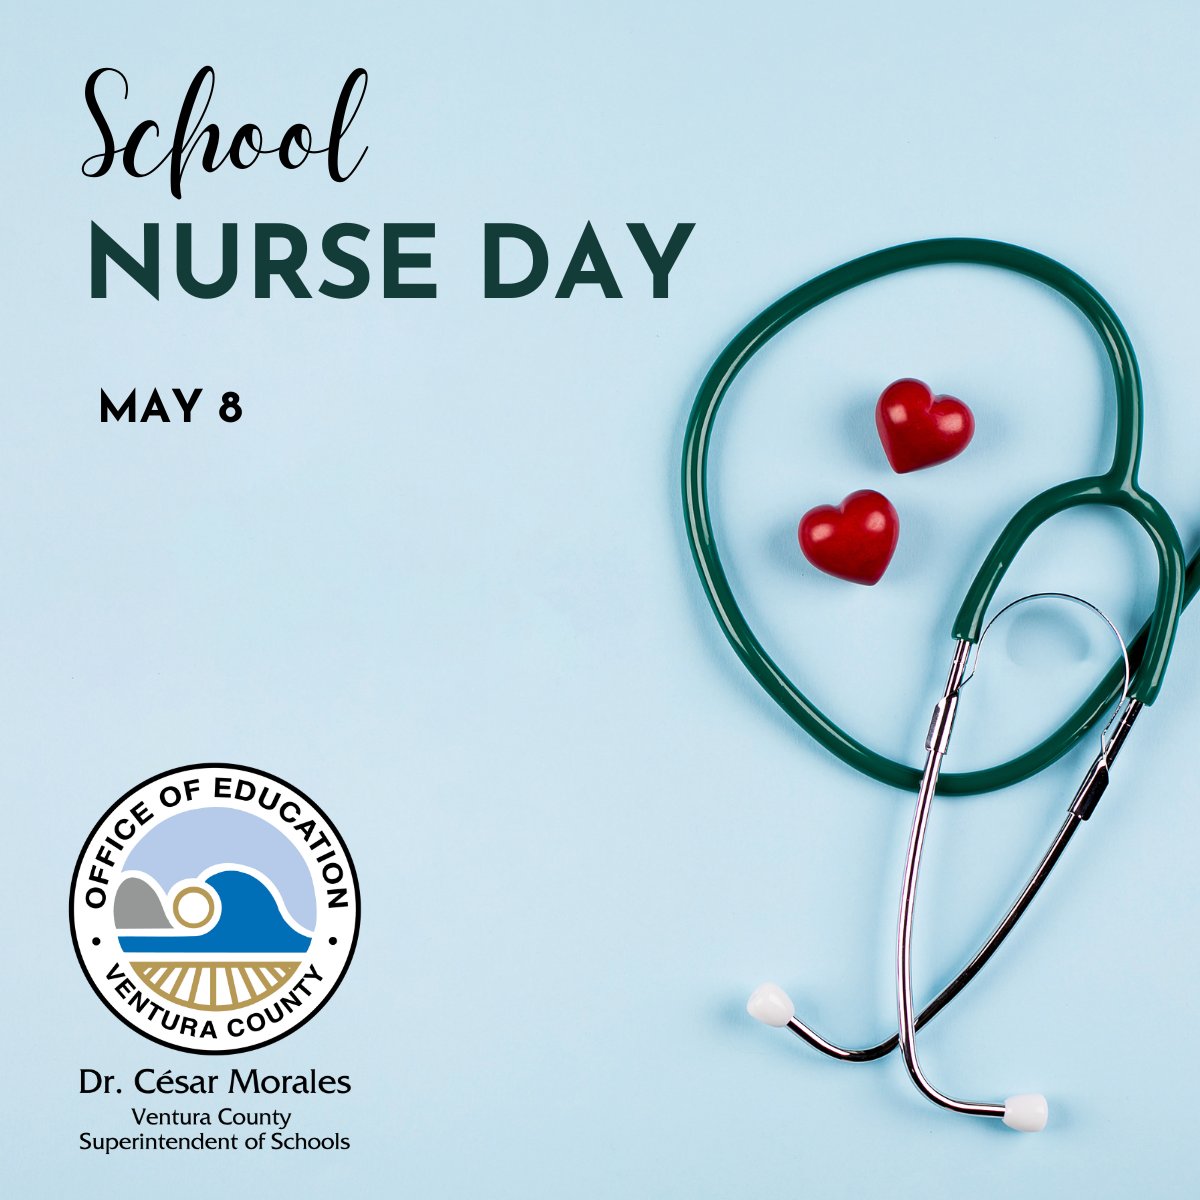 On National School Nurse Day, the Ventura County Office of Education honors our local school nurses who work diligently to keep students healthy and safe. Thank you!!!